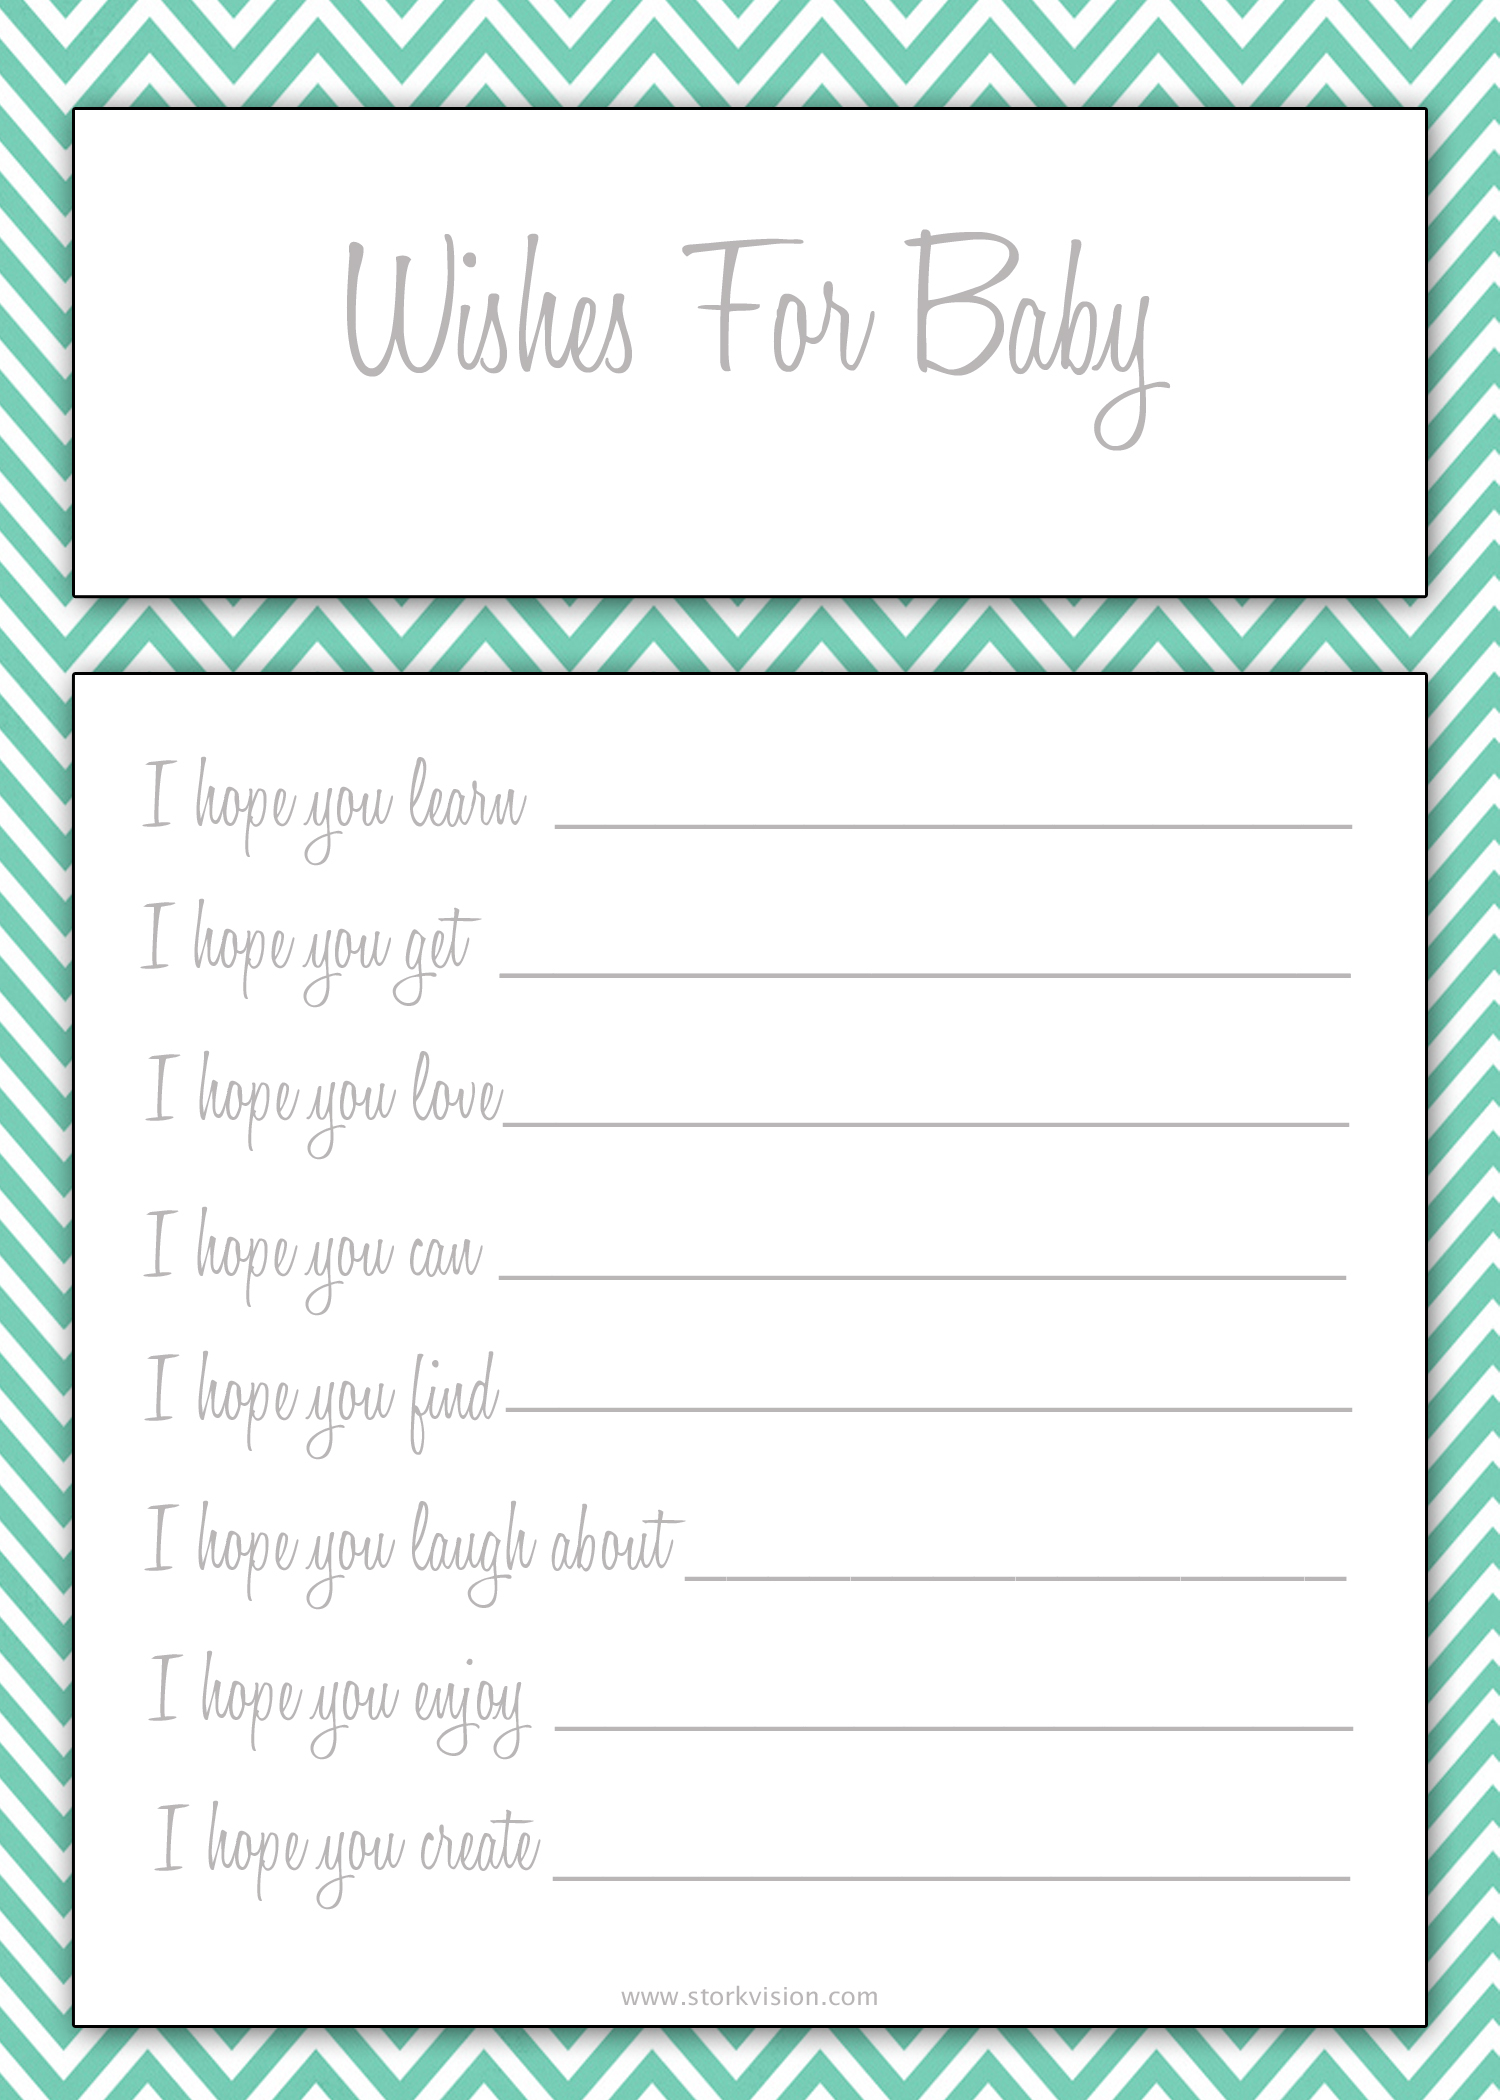 5-best-images-of-free-printable-wishes-for-baby-boy-printable-baby